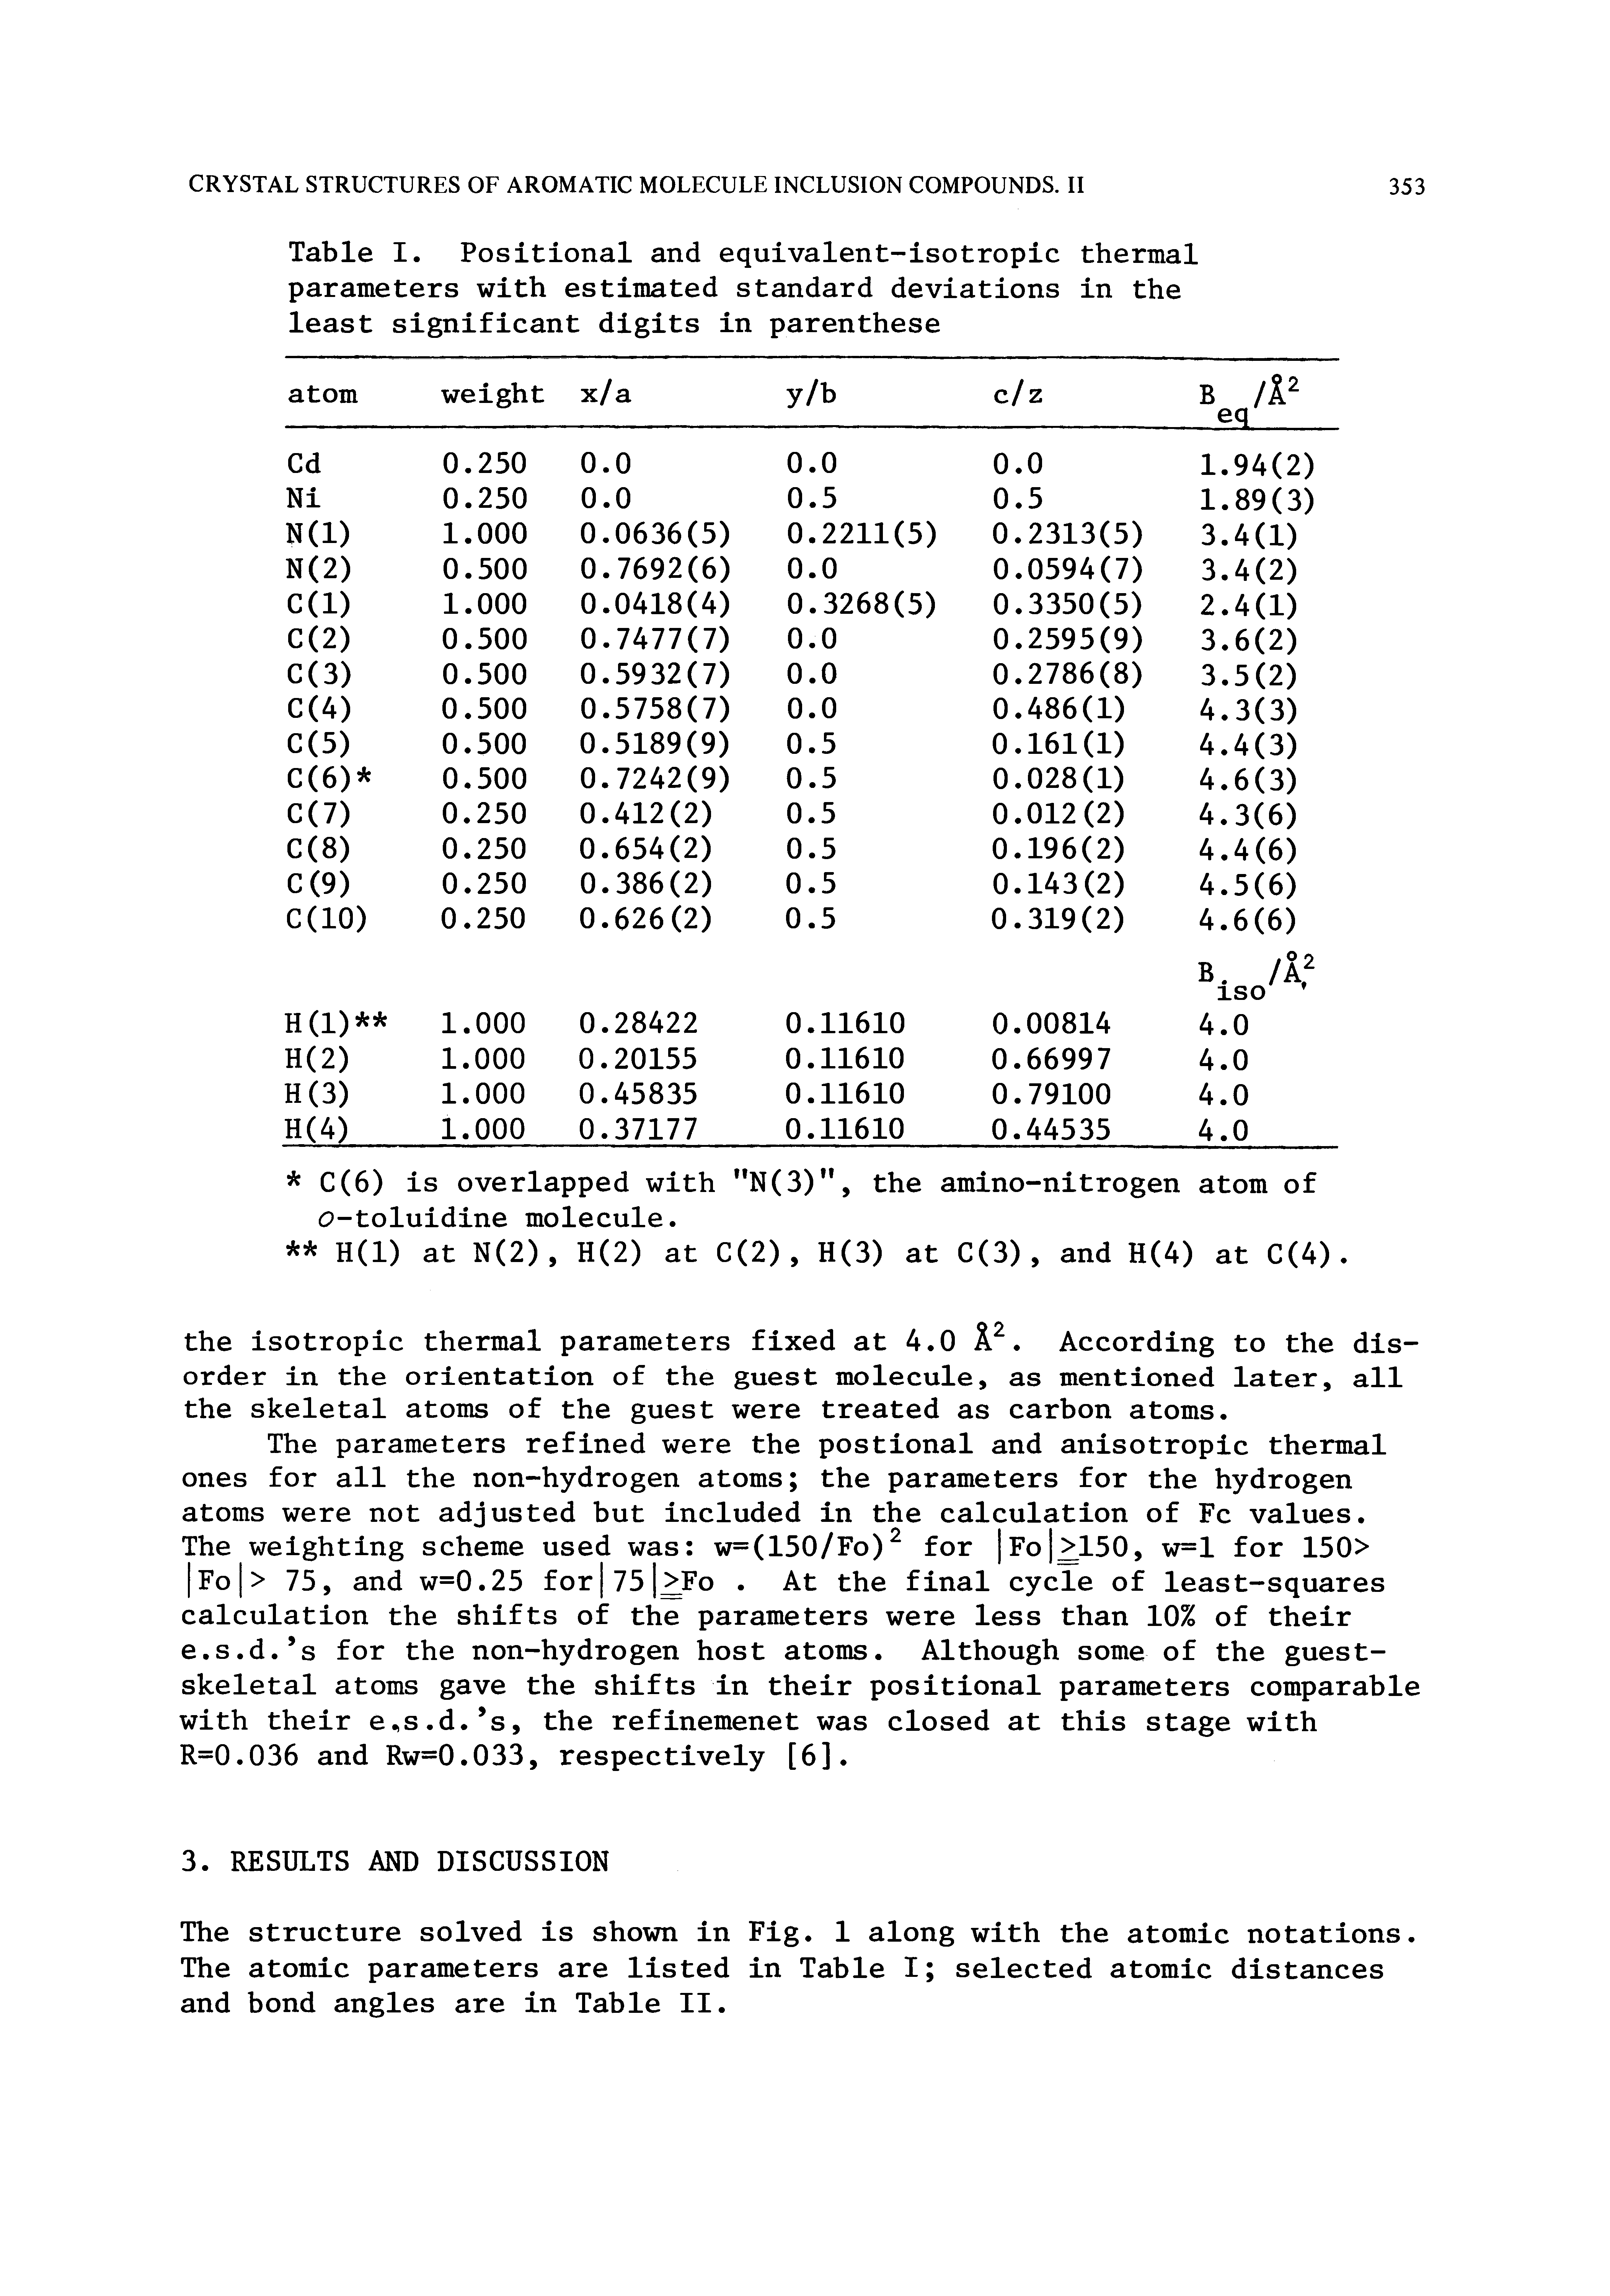 Table I. Positional and equivalent-isotropic thermal parameters with estimated standard deviations in the least significant digits in parenthese...